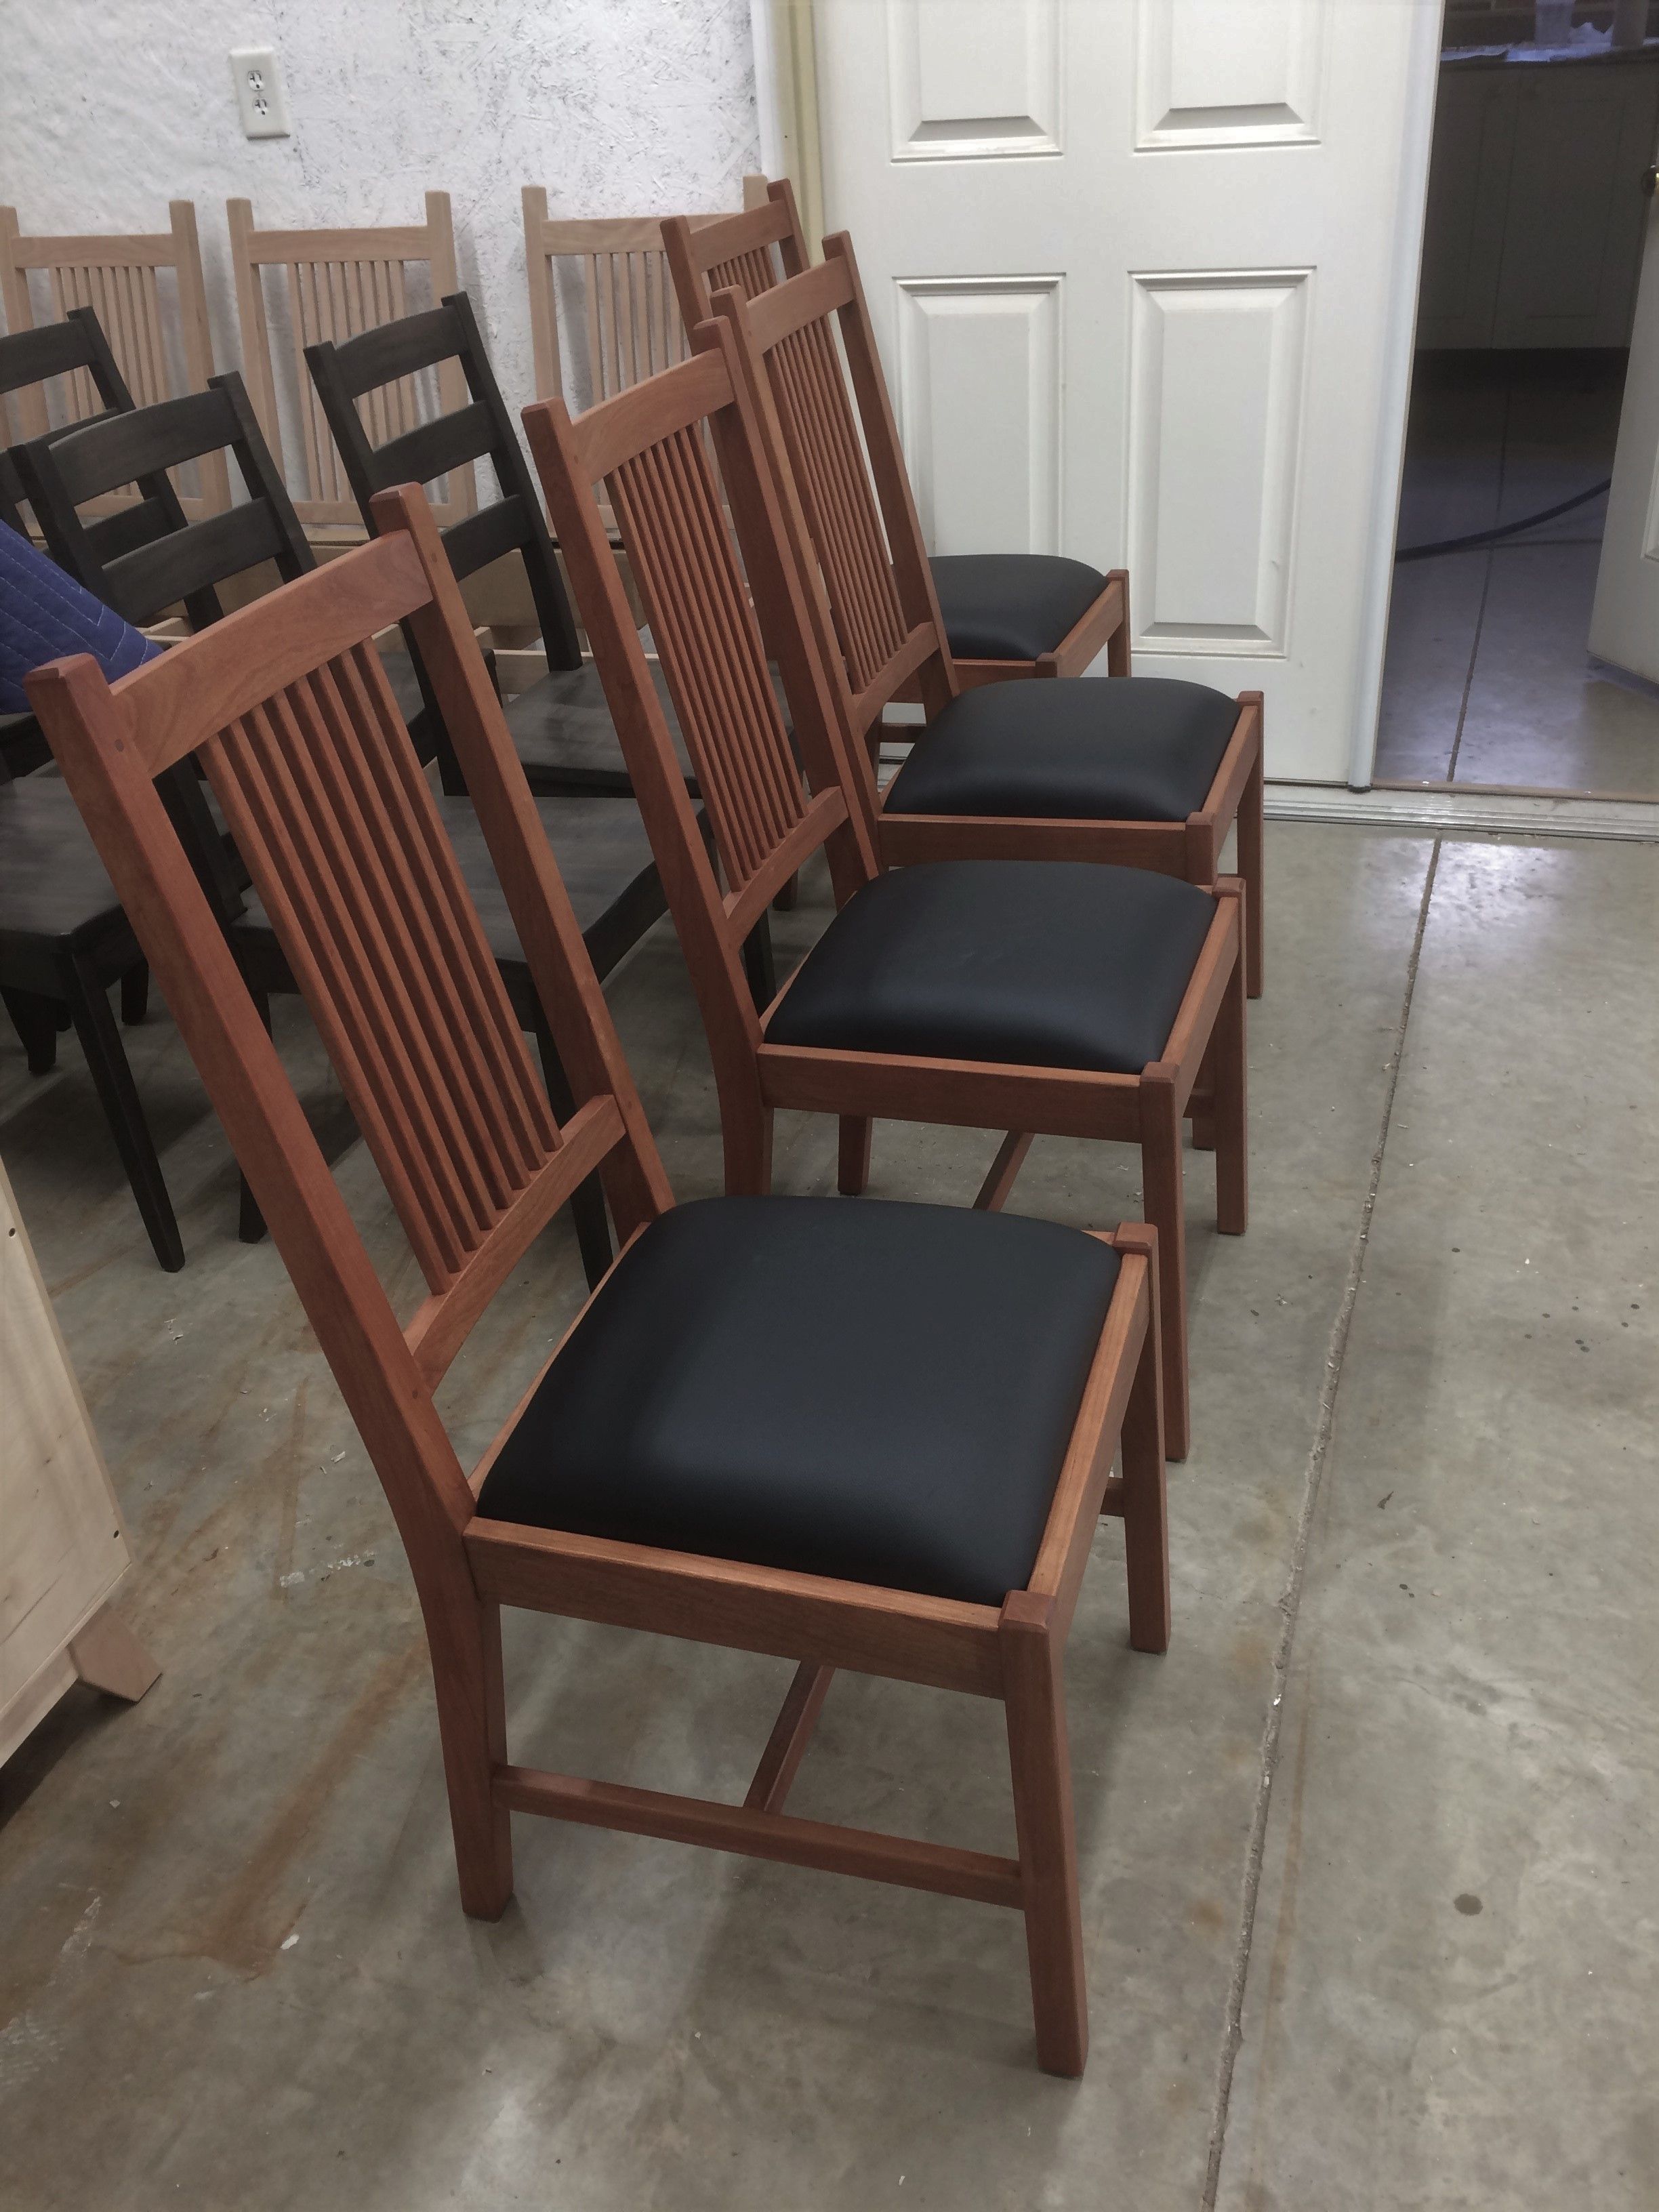 Custom Solid Cherry Mission Style Dining Chairs By Glessboards Custommade Com